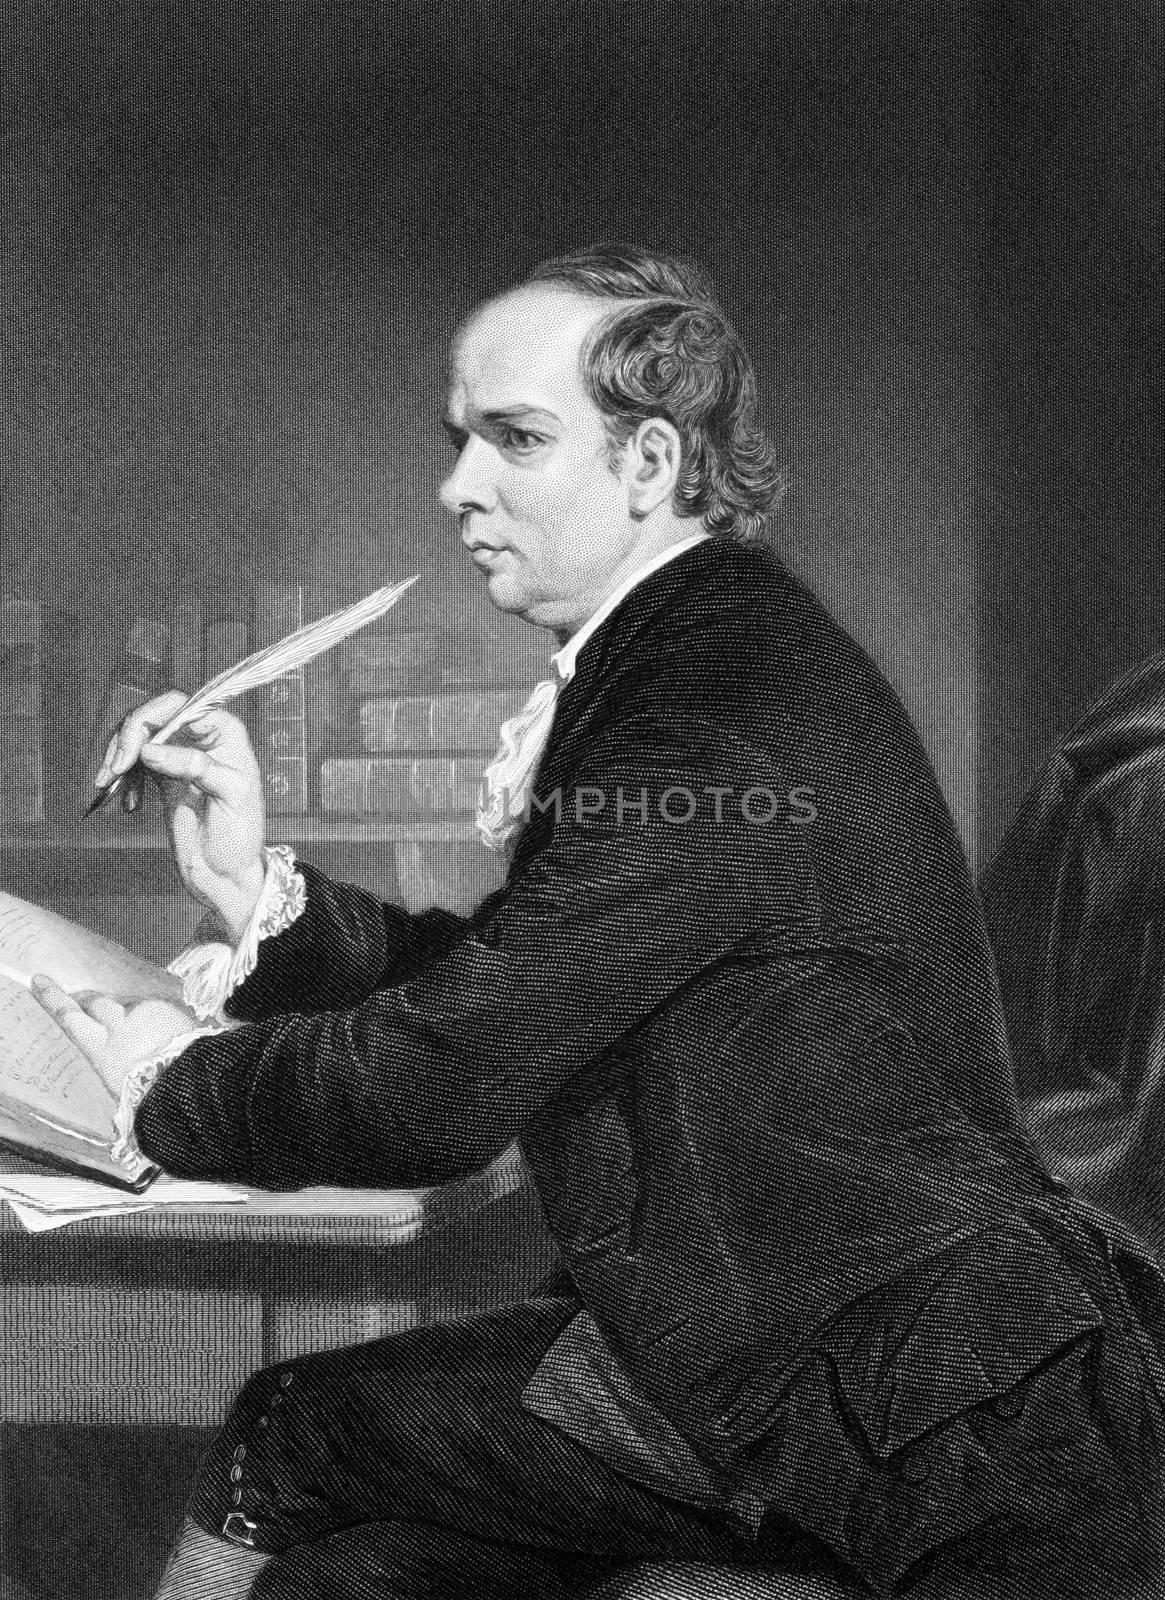 Oliver Goldsmith (1728-1774) on engraving from 1873. Irish writer, poet and physician. Engraved after a painting by A.Chappel and published in "The Masterpiece Library of Short Stories'',USA,1873.